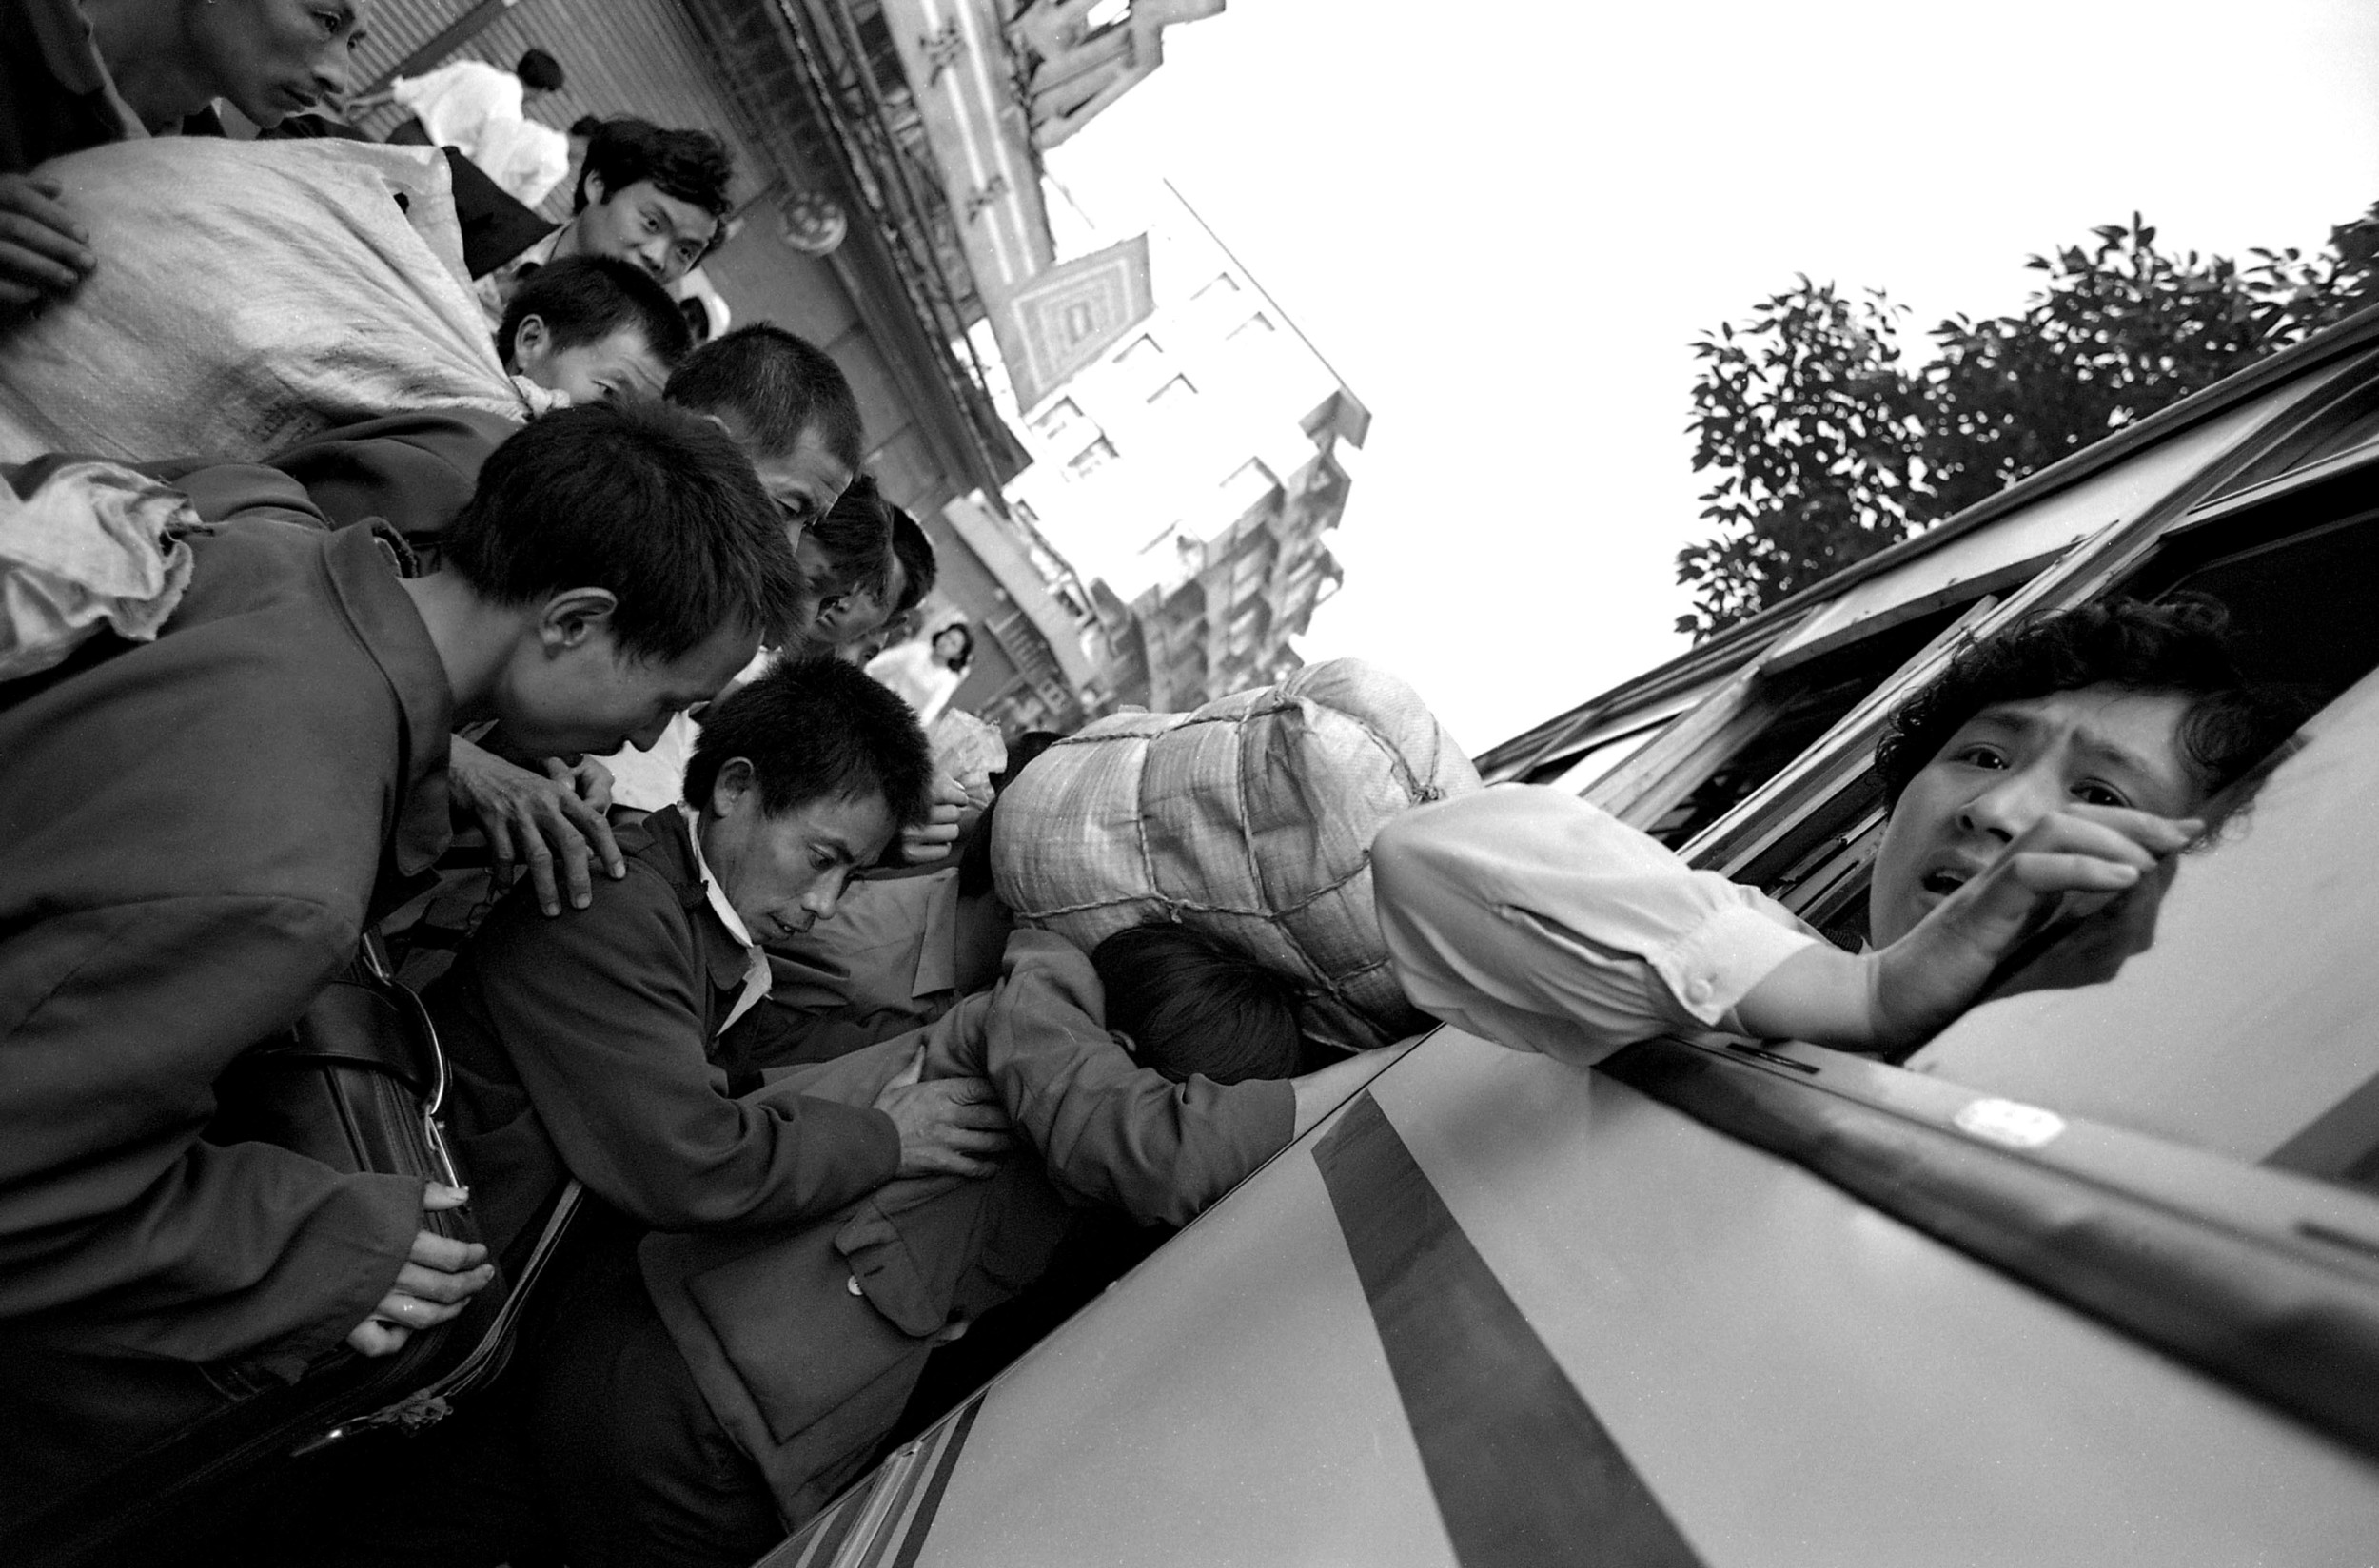 Canton Station Migrant Workers Crowd Bus Hi Res.jpg